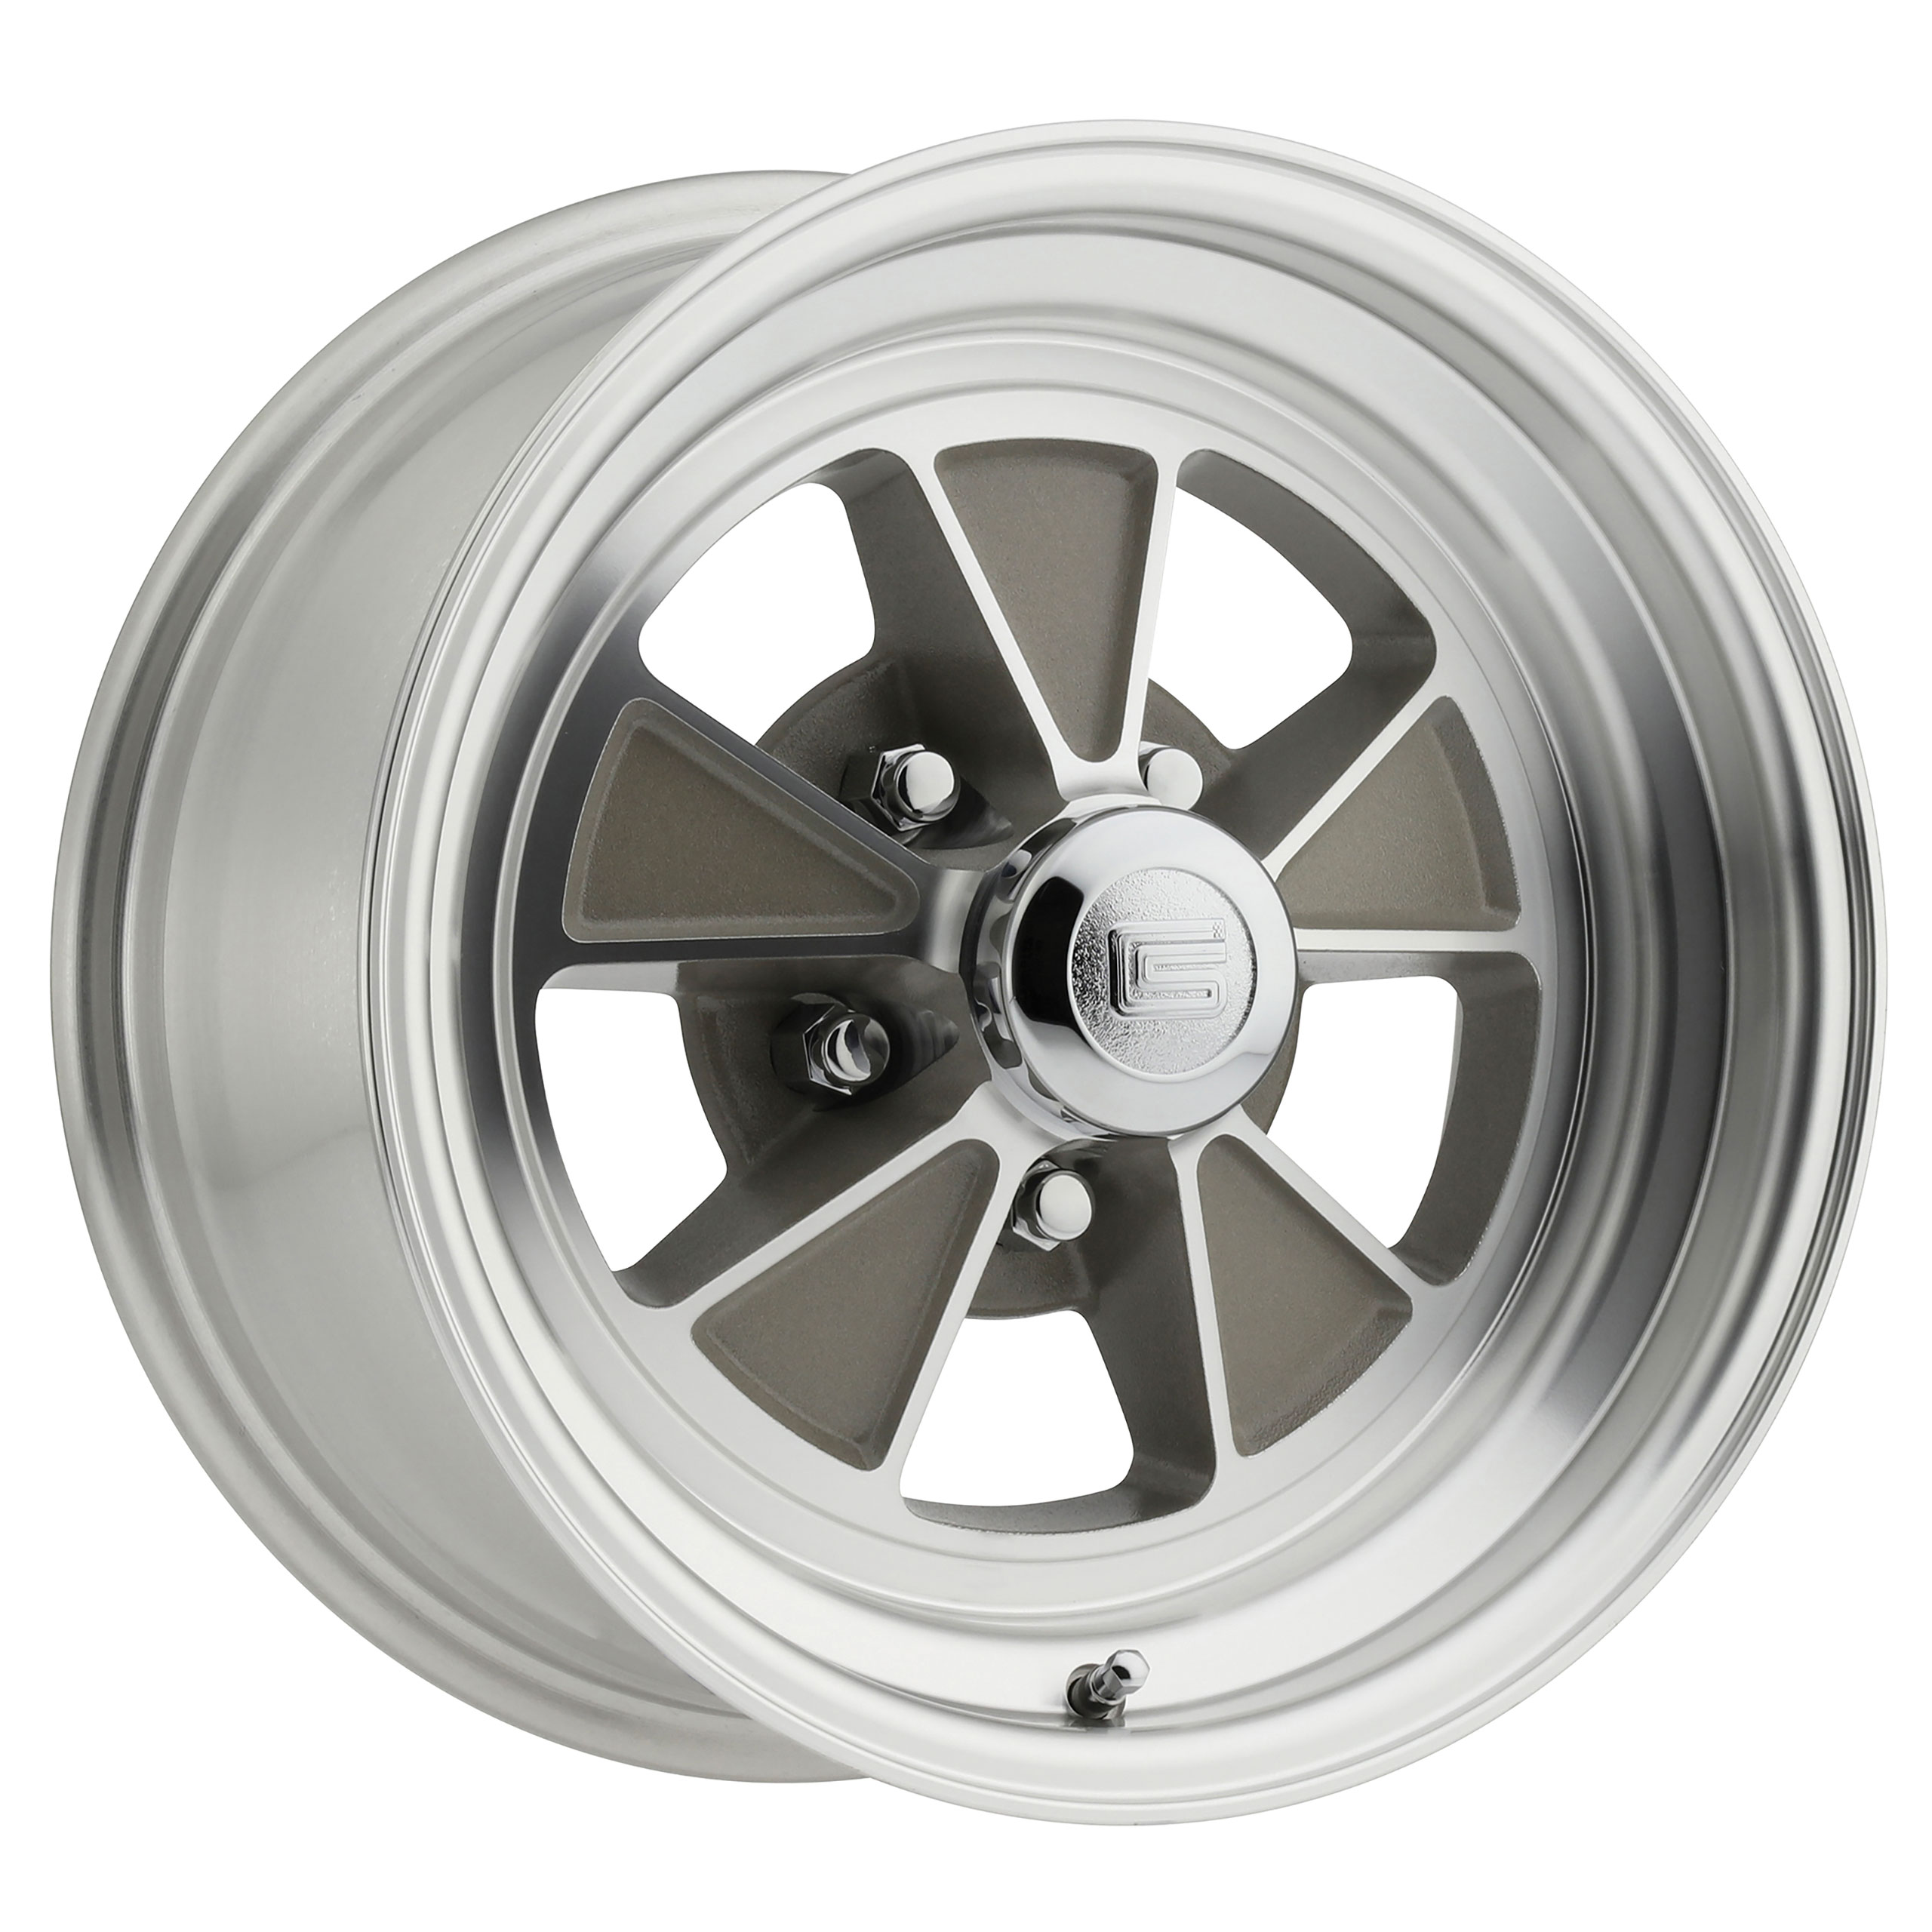 First Generation 1965-1973 Ford Mustang Legendary GT5 Alloy Wheel 15